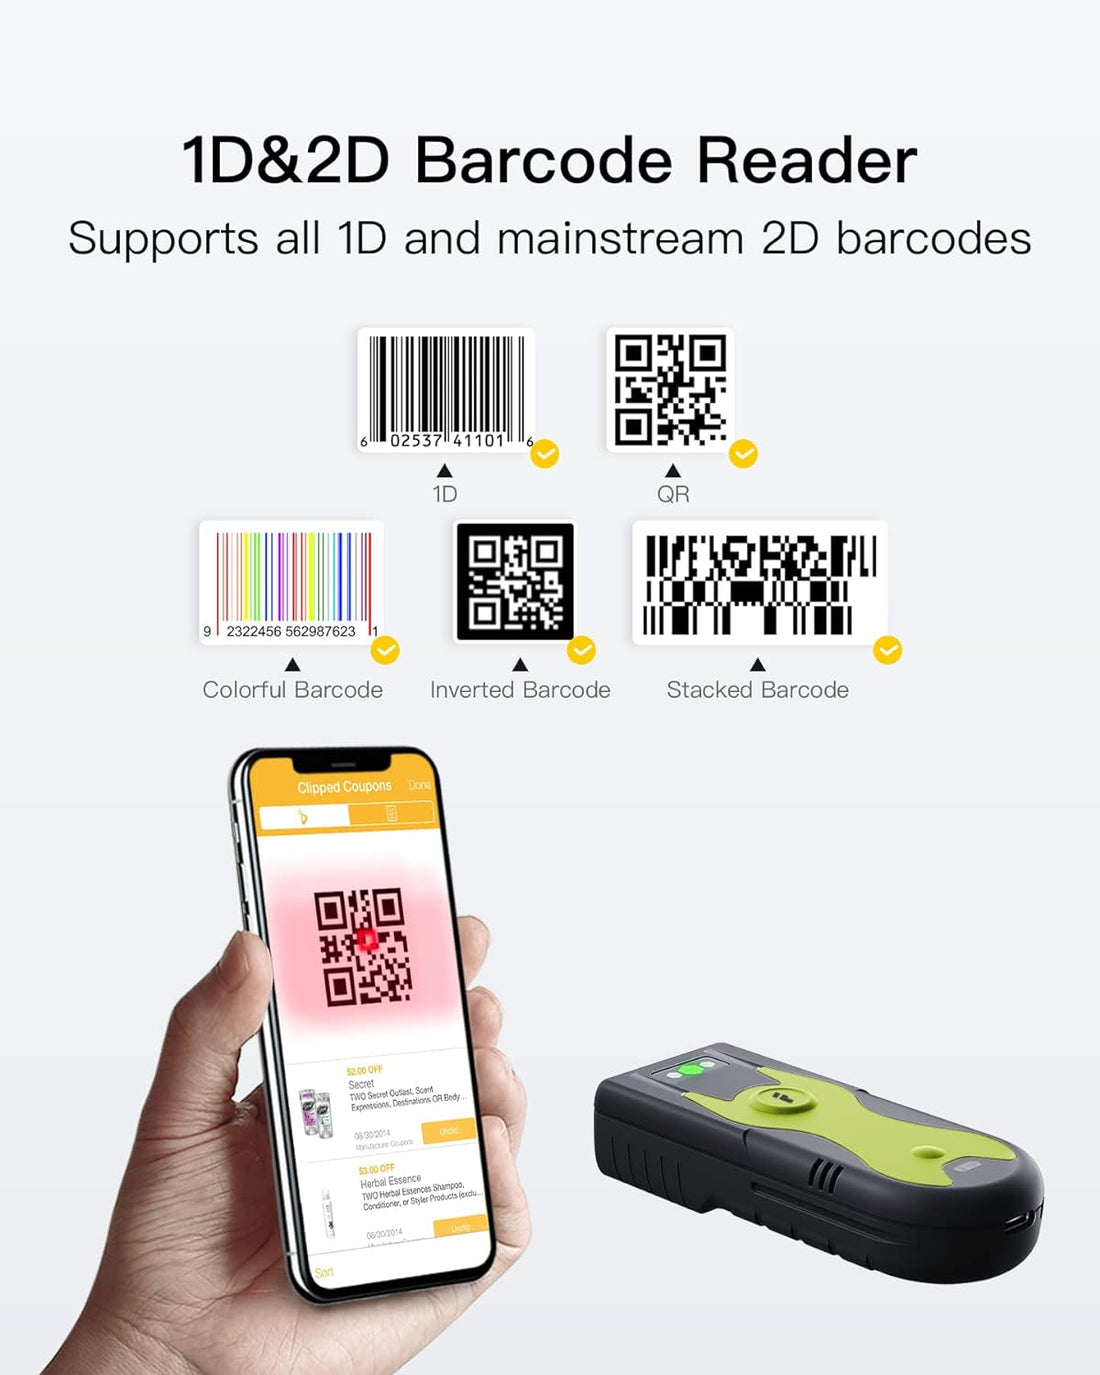 Inateck BCST-42 Bluetooth 2D Barcode Scanner with 2.4 GHz USB Adapter, Reads Barcodes from Screens, Exclusive Quick Buttons